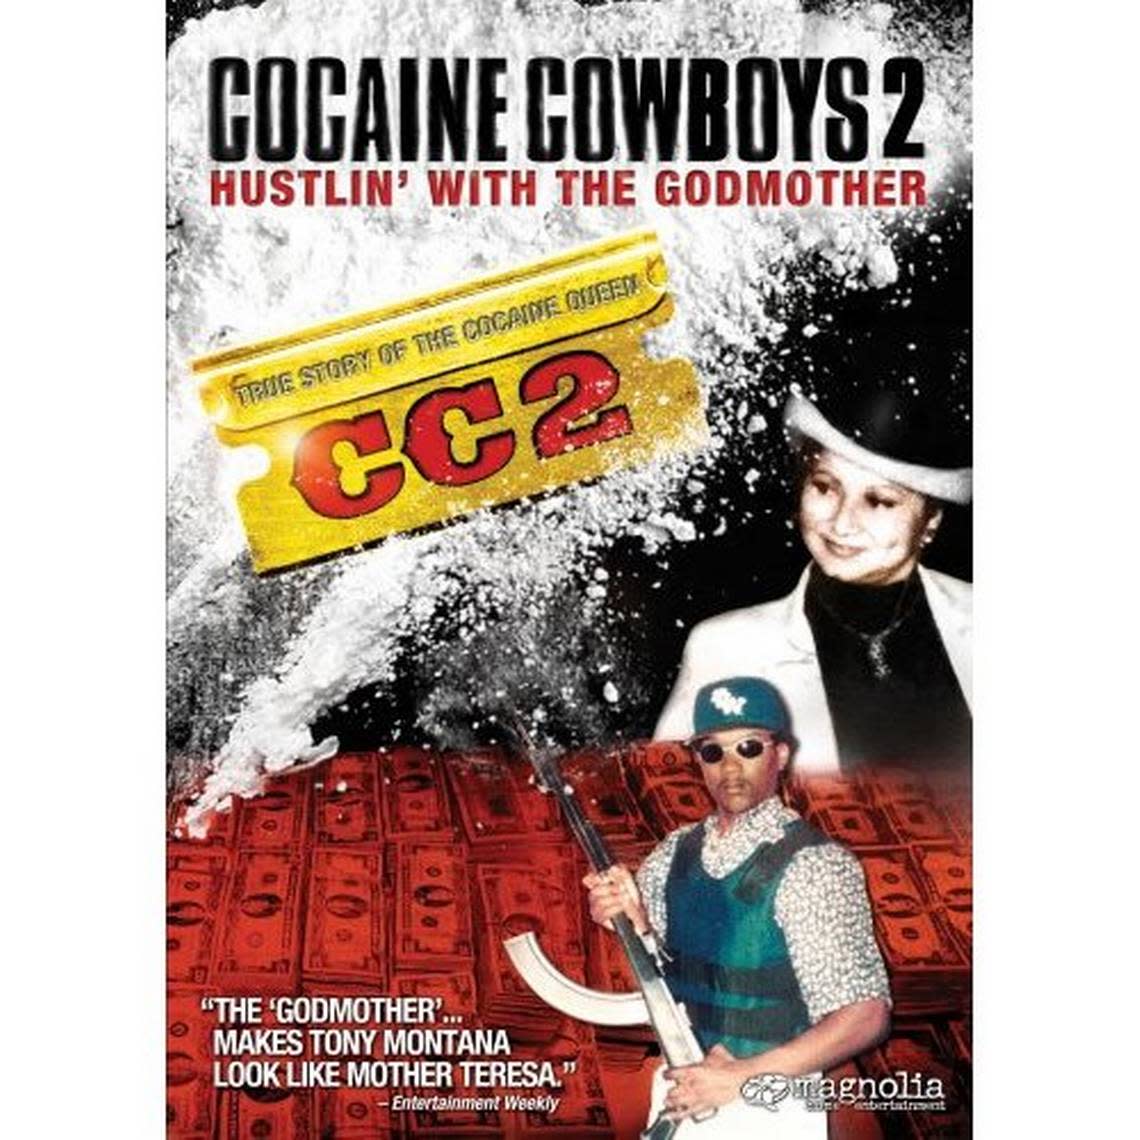 Cocaine Cowboys 2 - Hustlin’ With The Godmother (2008). Starring: Charles Cosby, Griselda Blanco Director: Billy Corben Rating